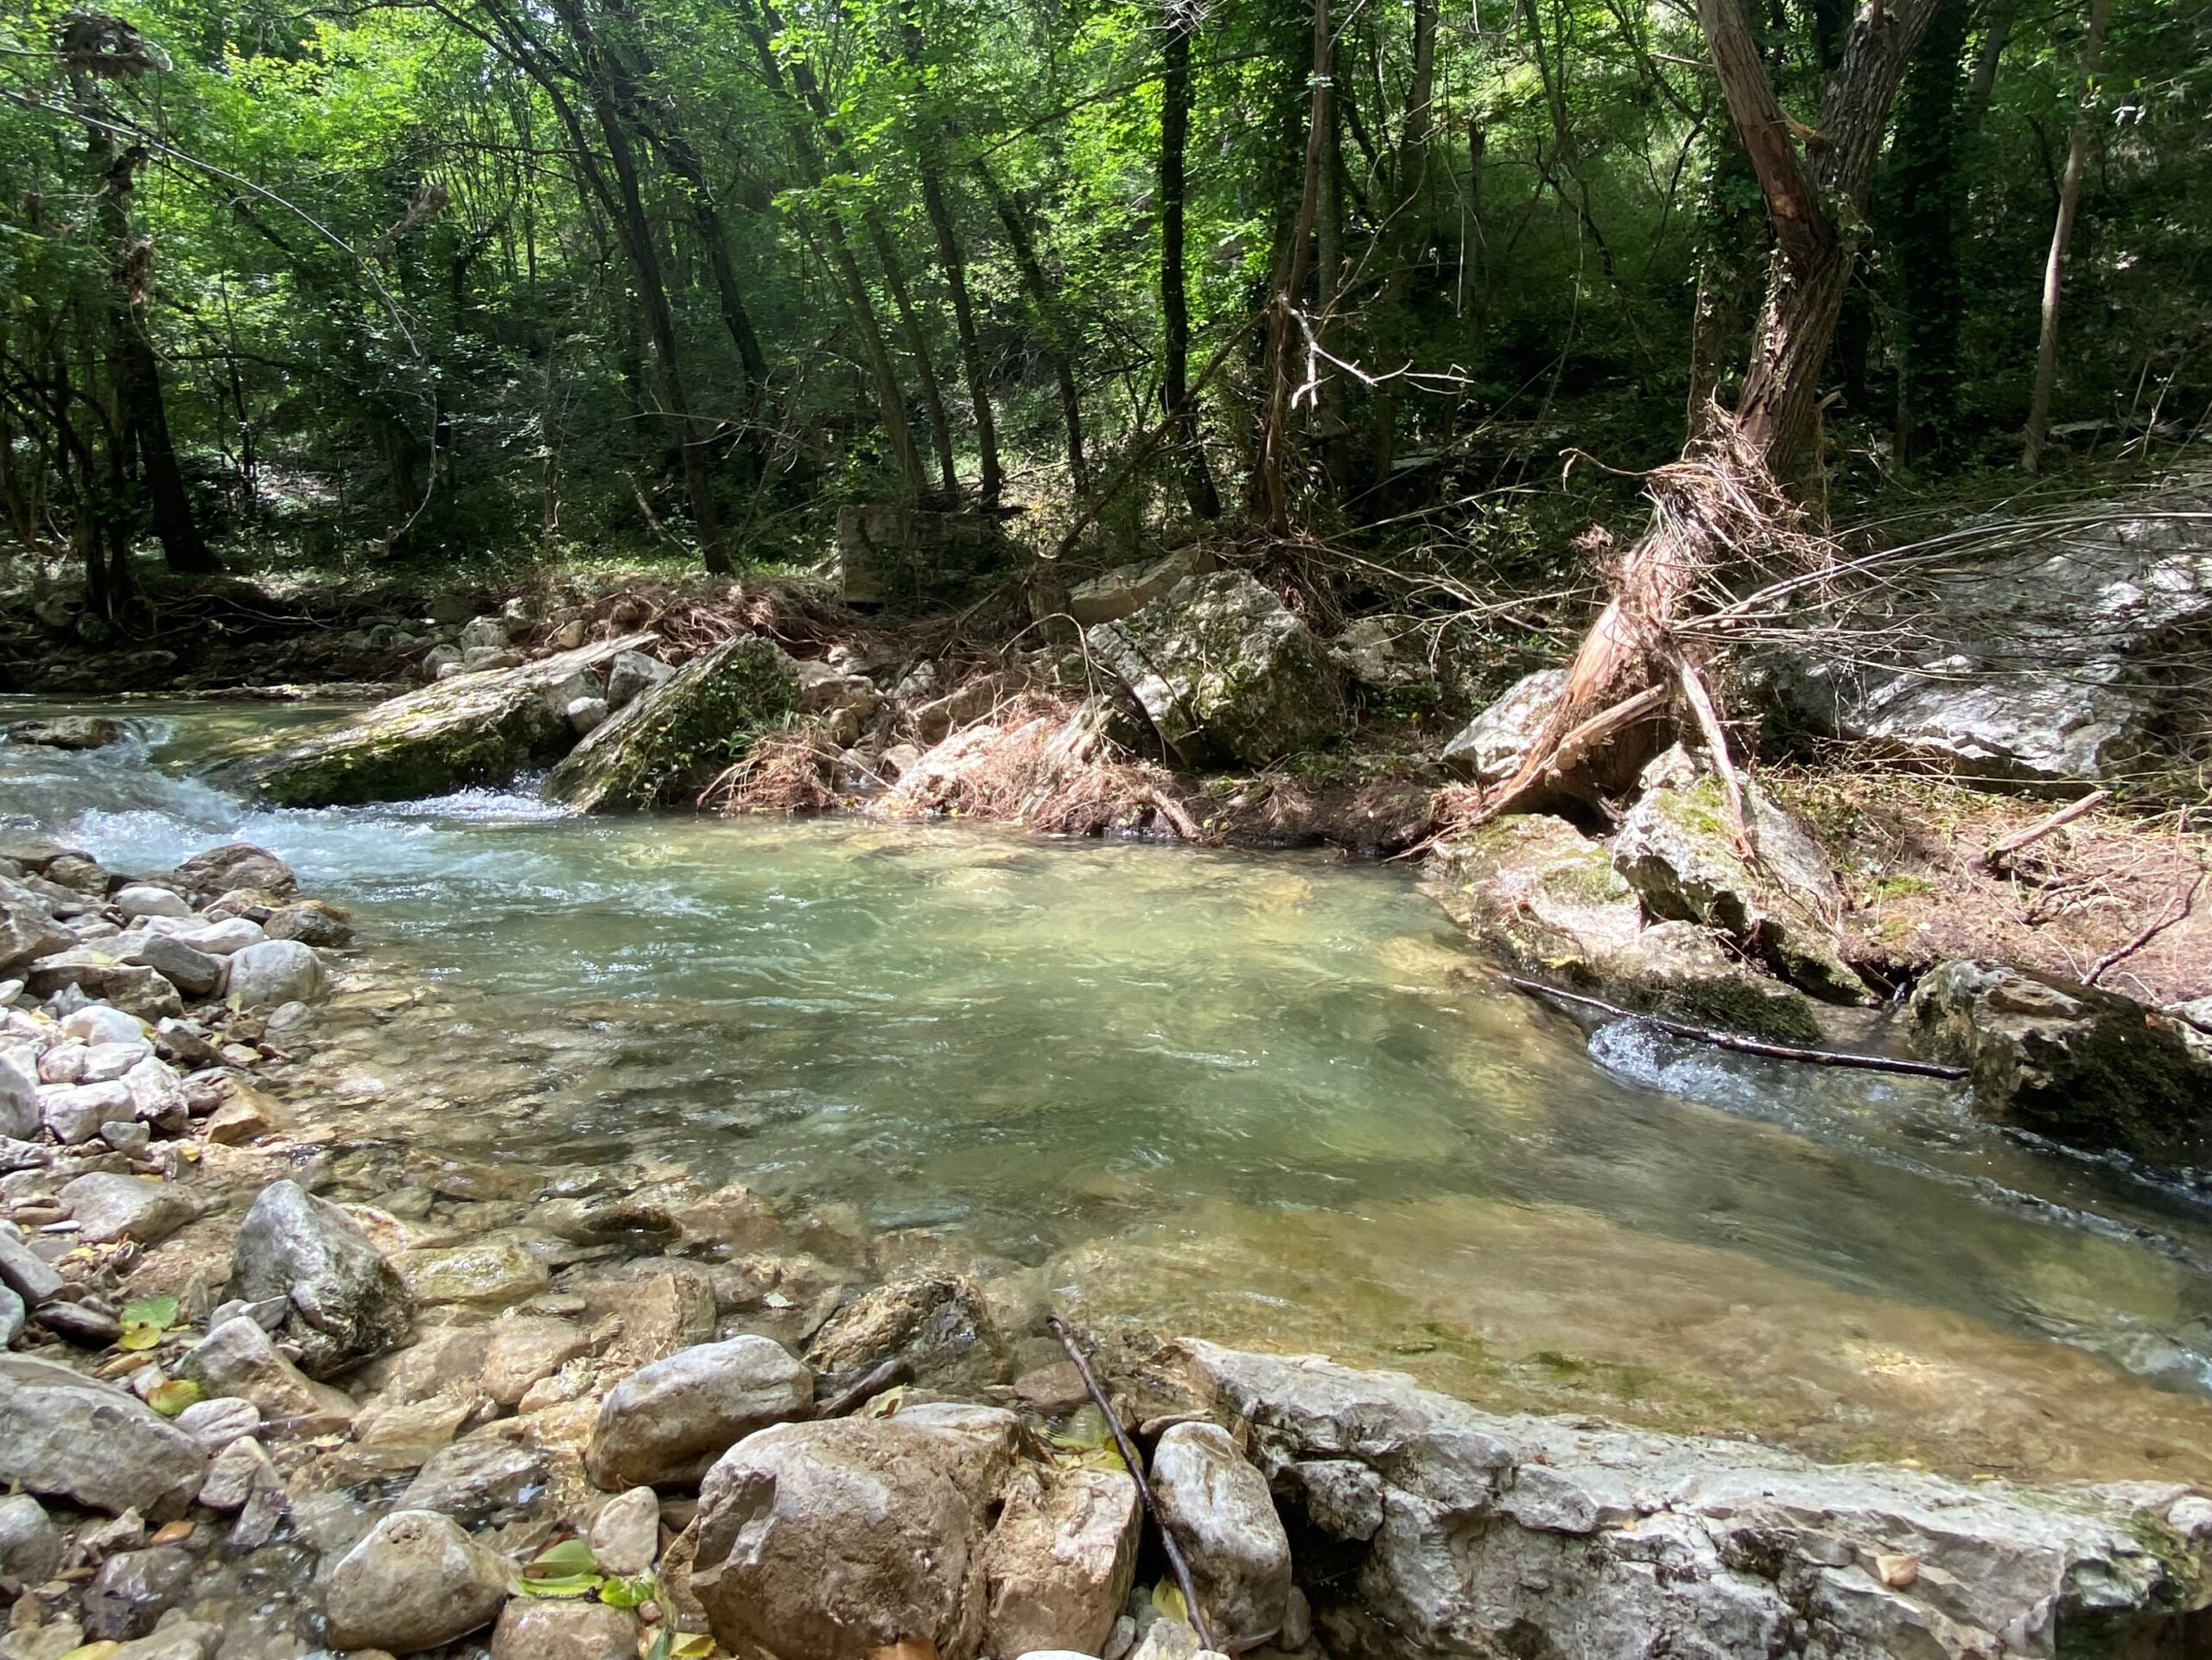 A positive feasibility study paved the way for the release of crayfish in the Gizio, Romito, and Verde rivers.